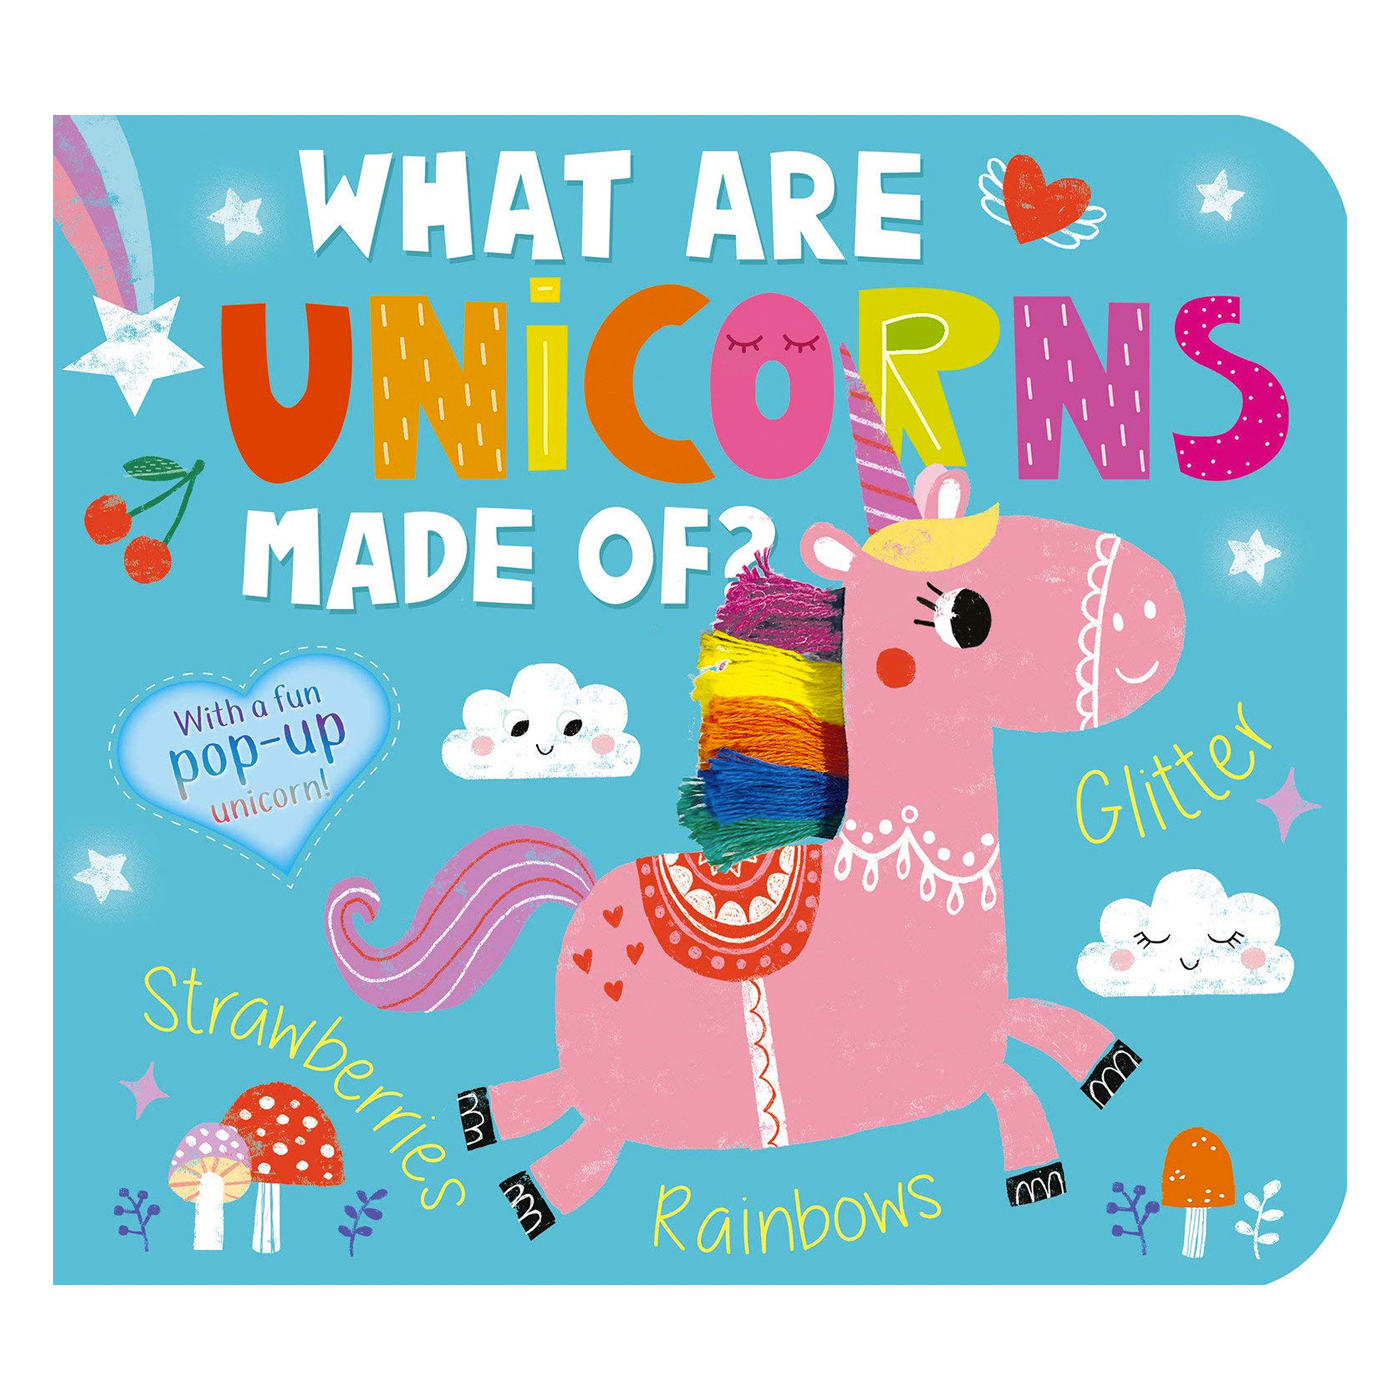  What Are Unicorns Made Of?